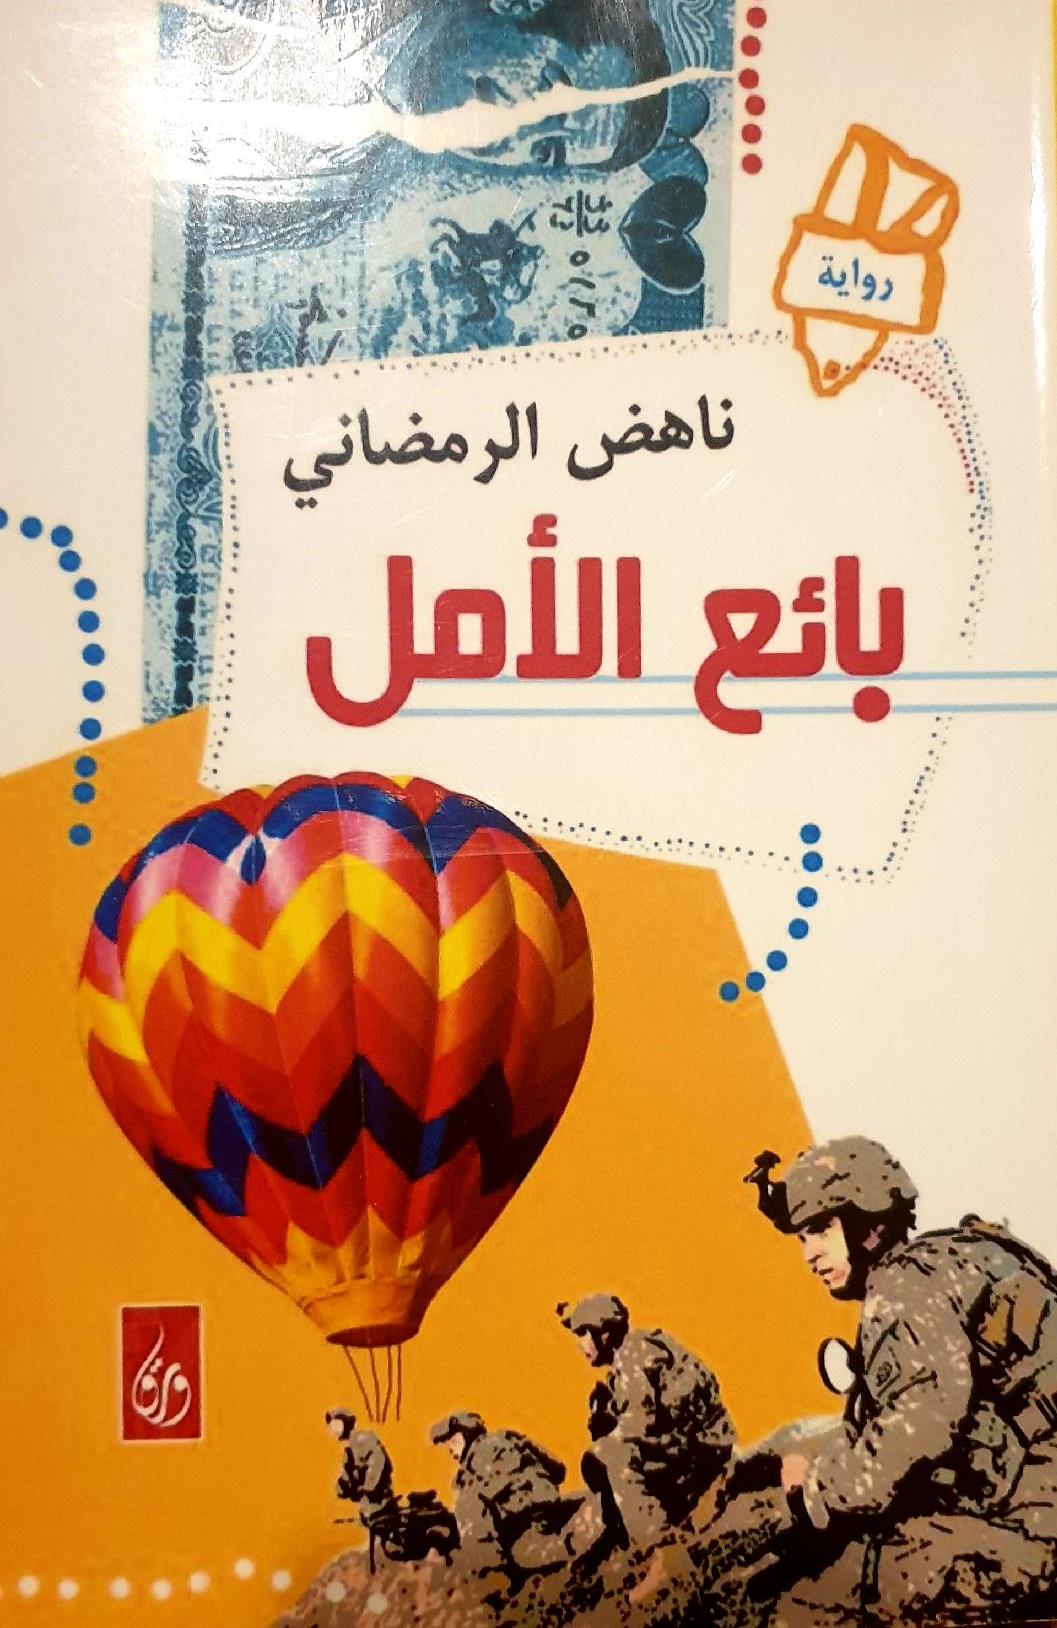 Cover of Ramadhaniʹs "The Hope Vendor" (published in Arabic by Dar Waraq)